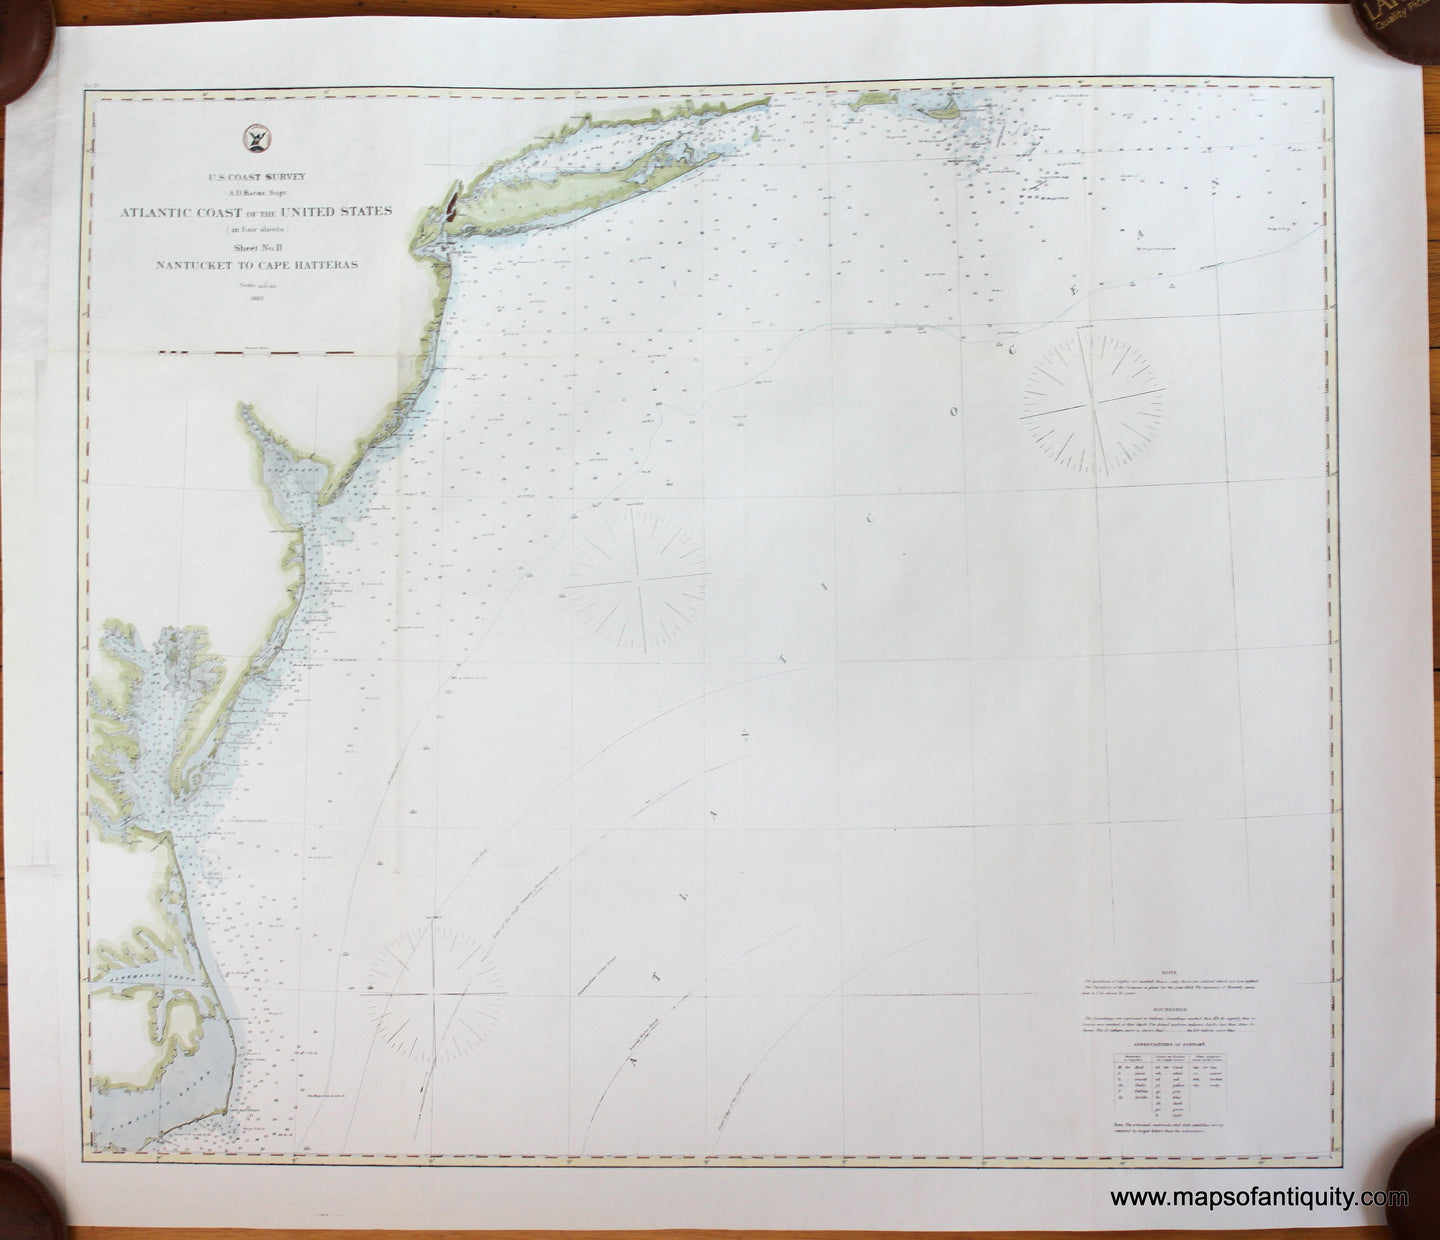 Genuine-Antique-Survey-Chart-Atlantic-Coast-of-the-United-States-in-four-sheets-Sheet-No-2-Nantucket-to-Cape-Hatteras-1863-US-Coast-Survey-Maps-Of-Antiquity